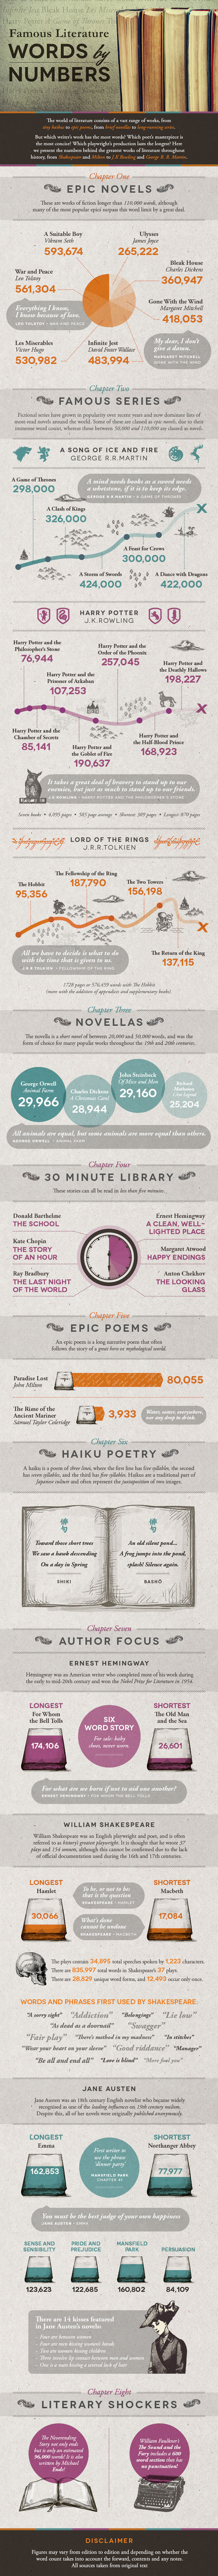 Famous Literature Words By Numbers